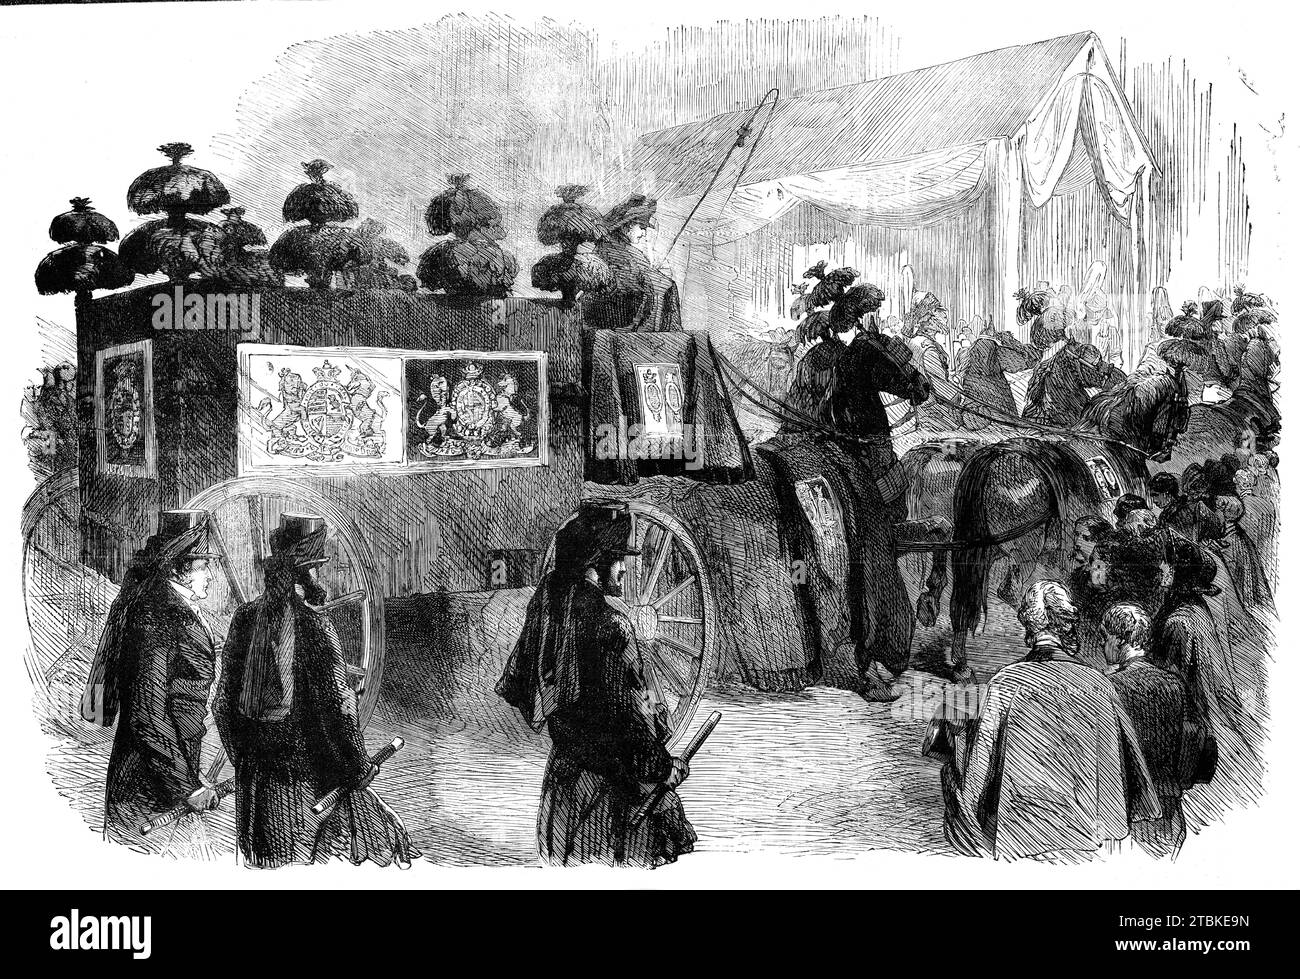 The Funeral of His Late Royal Highness the Prince Consort: the Hearse approaching St. George's Chapel, 1861. Prince Albert's hearse, drawn by six horses, accompanied by mourners. 'On Monday the remains of the late Prince Consort were interred in the last resting-place of England's Sovereigns - the Chapel Royal of St. George's, Windsor. By the express desire of his Royal Highness the funeral was of the plainest and most private character; but the chief men of the State were assembled to do honour to his obsequies, and by every sign of sorrow and mourning the nation at large manifested its sense Stock Photo